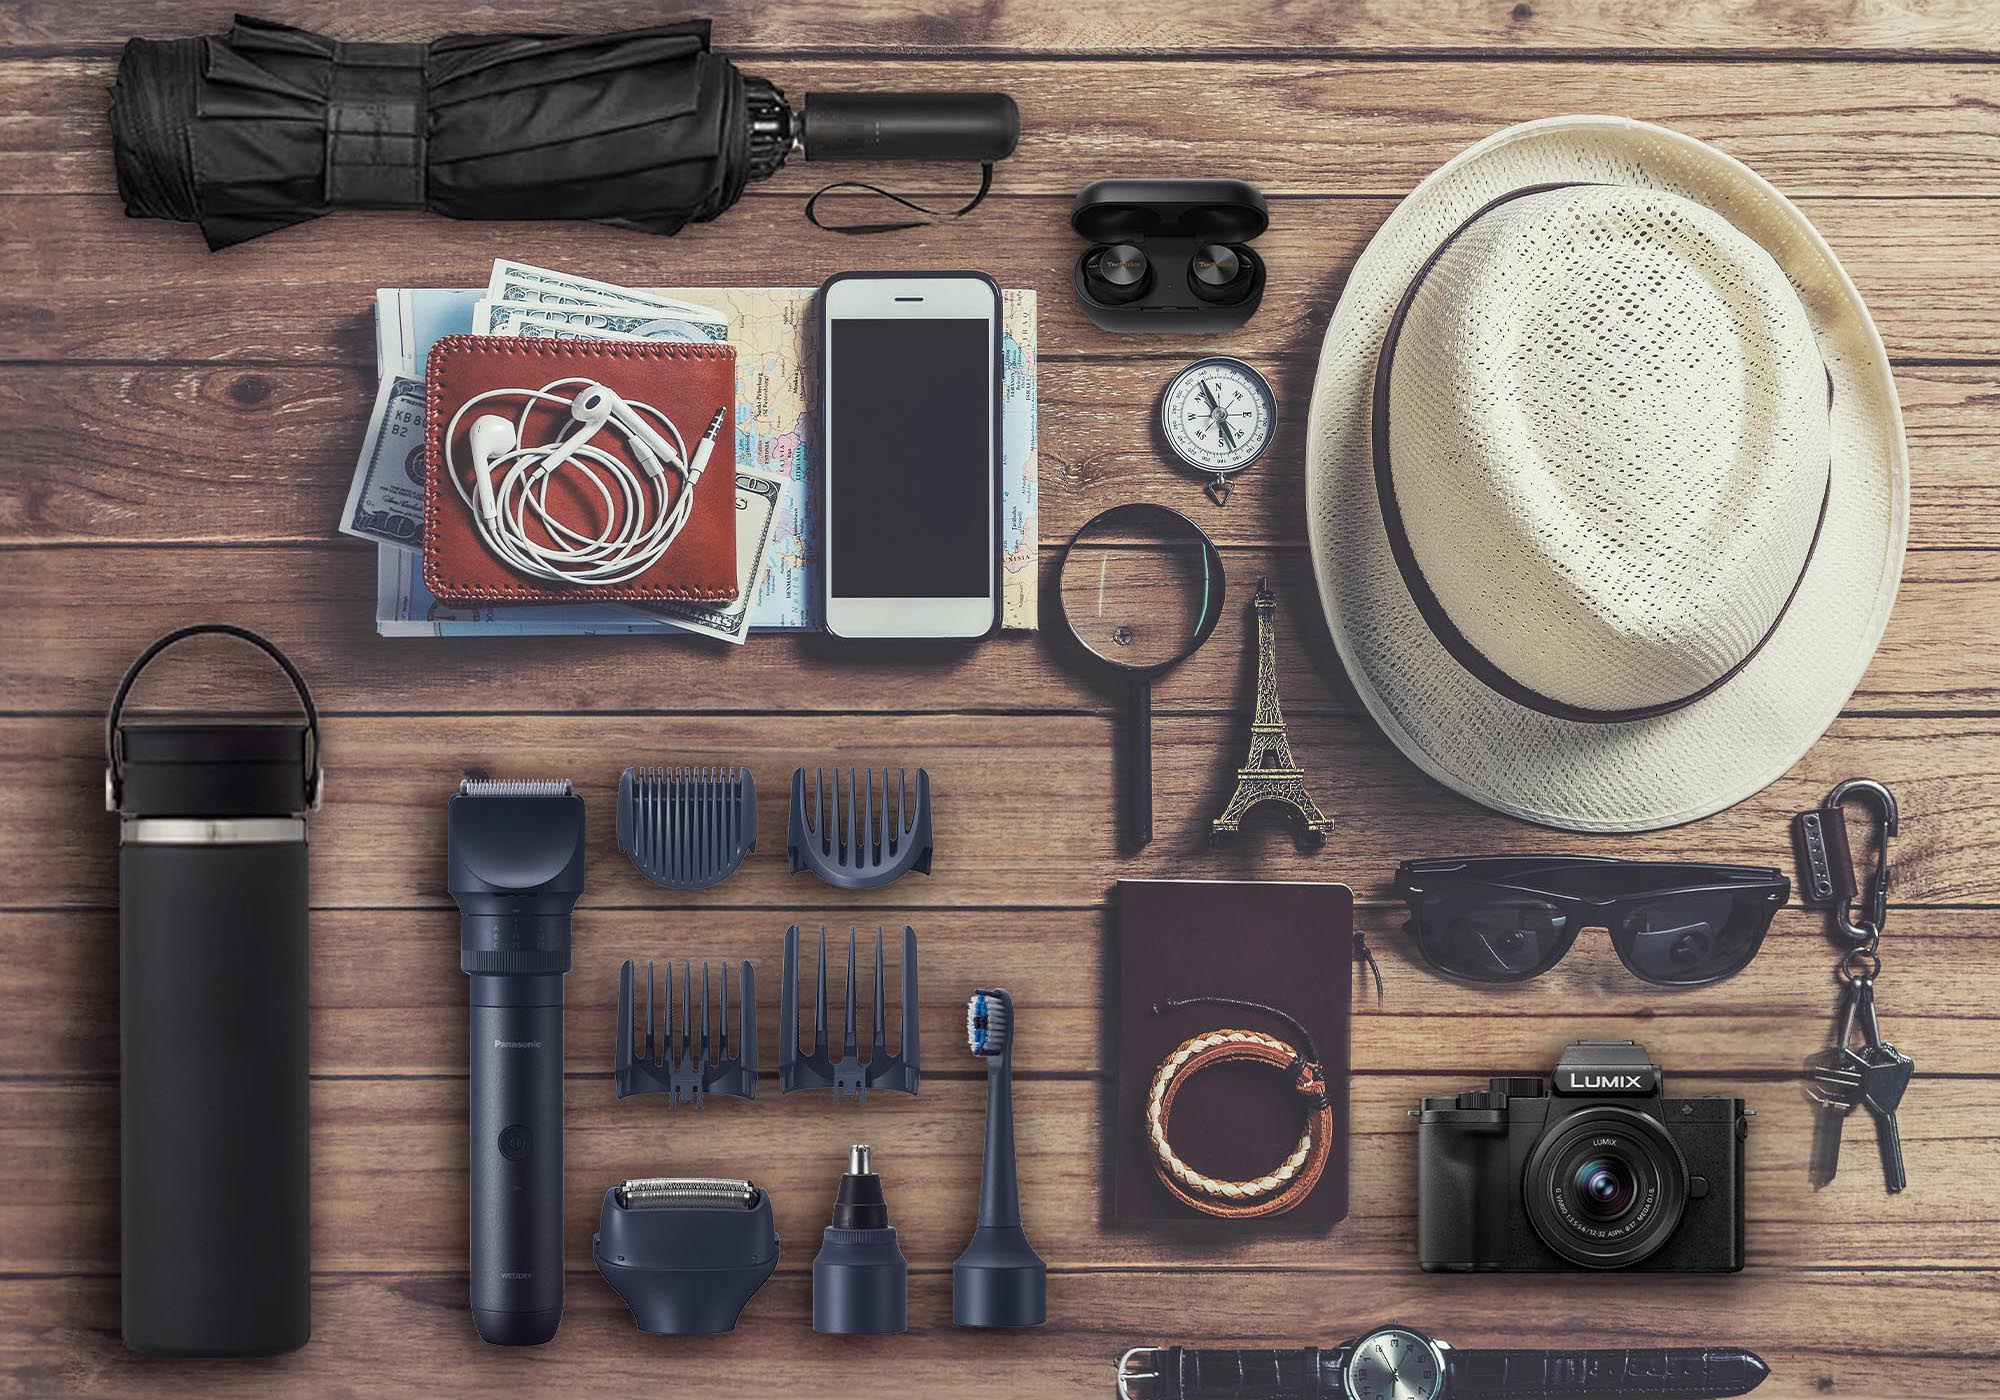 Travel-ready collection of Panasonic gear on a wooden surface, including a Lumix camera, noise-canceling earbuds, smartphone, and grooming kit